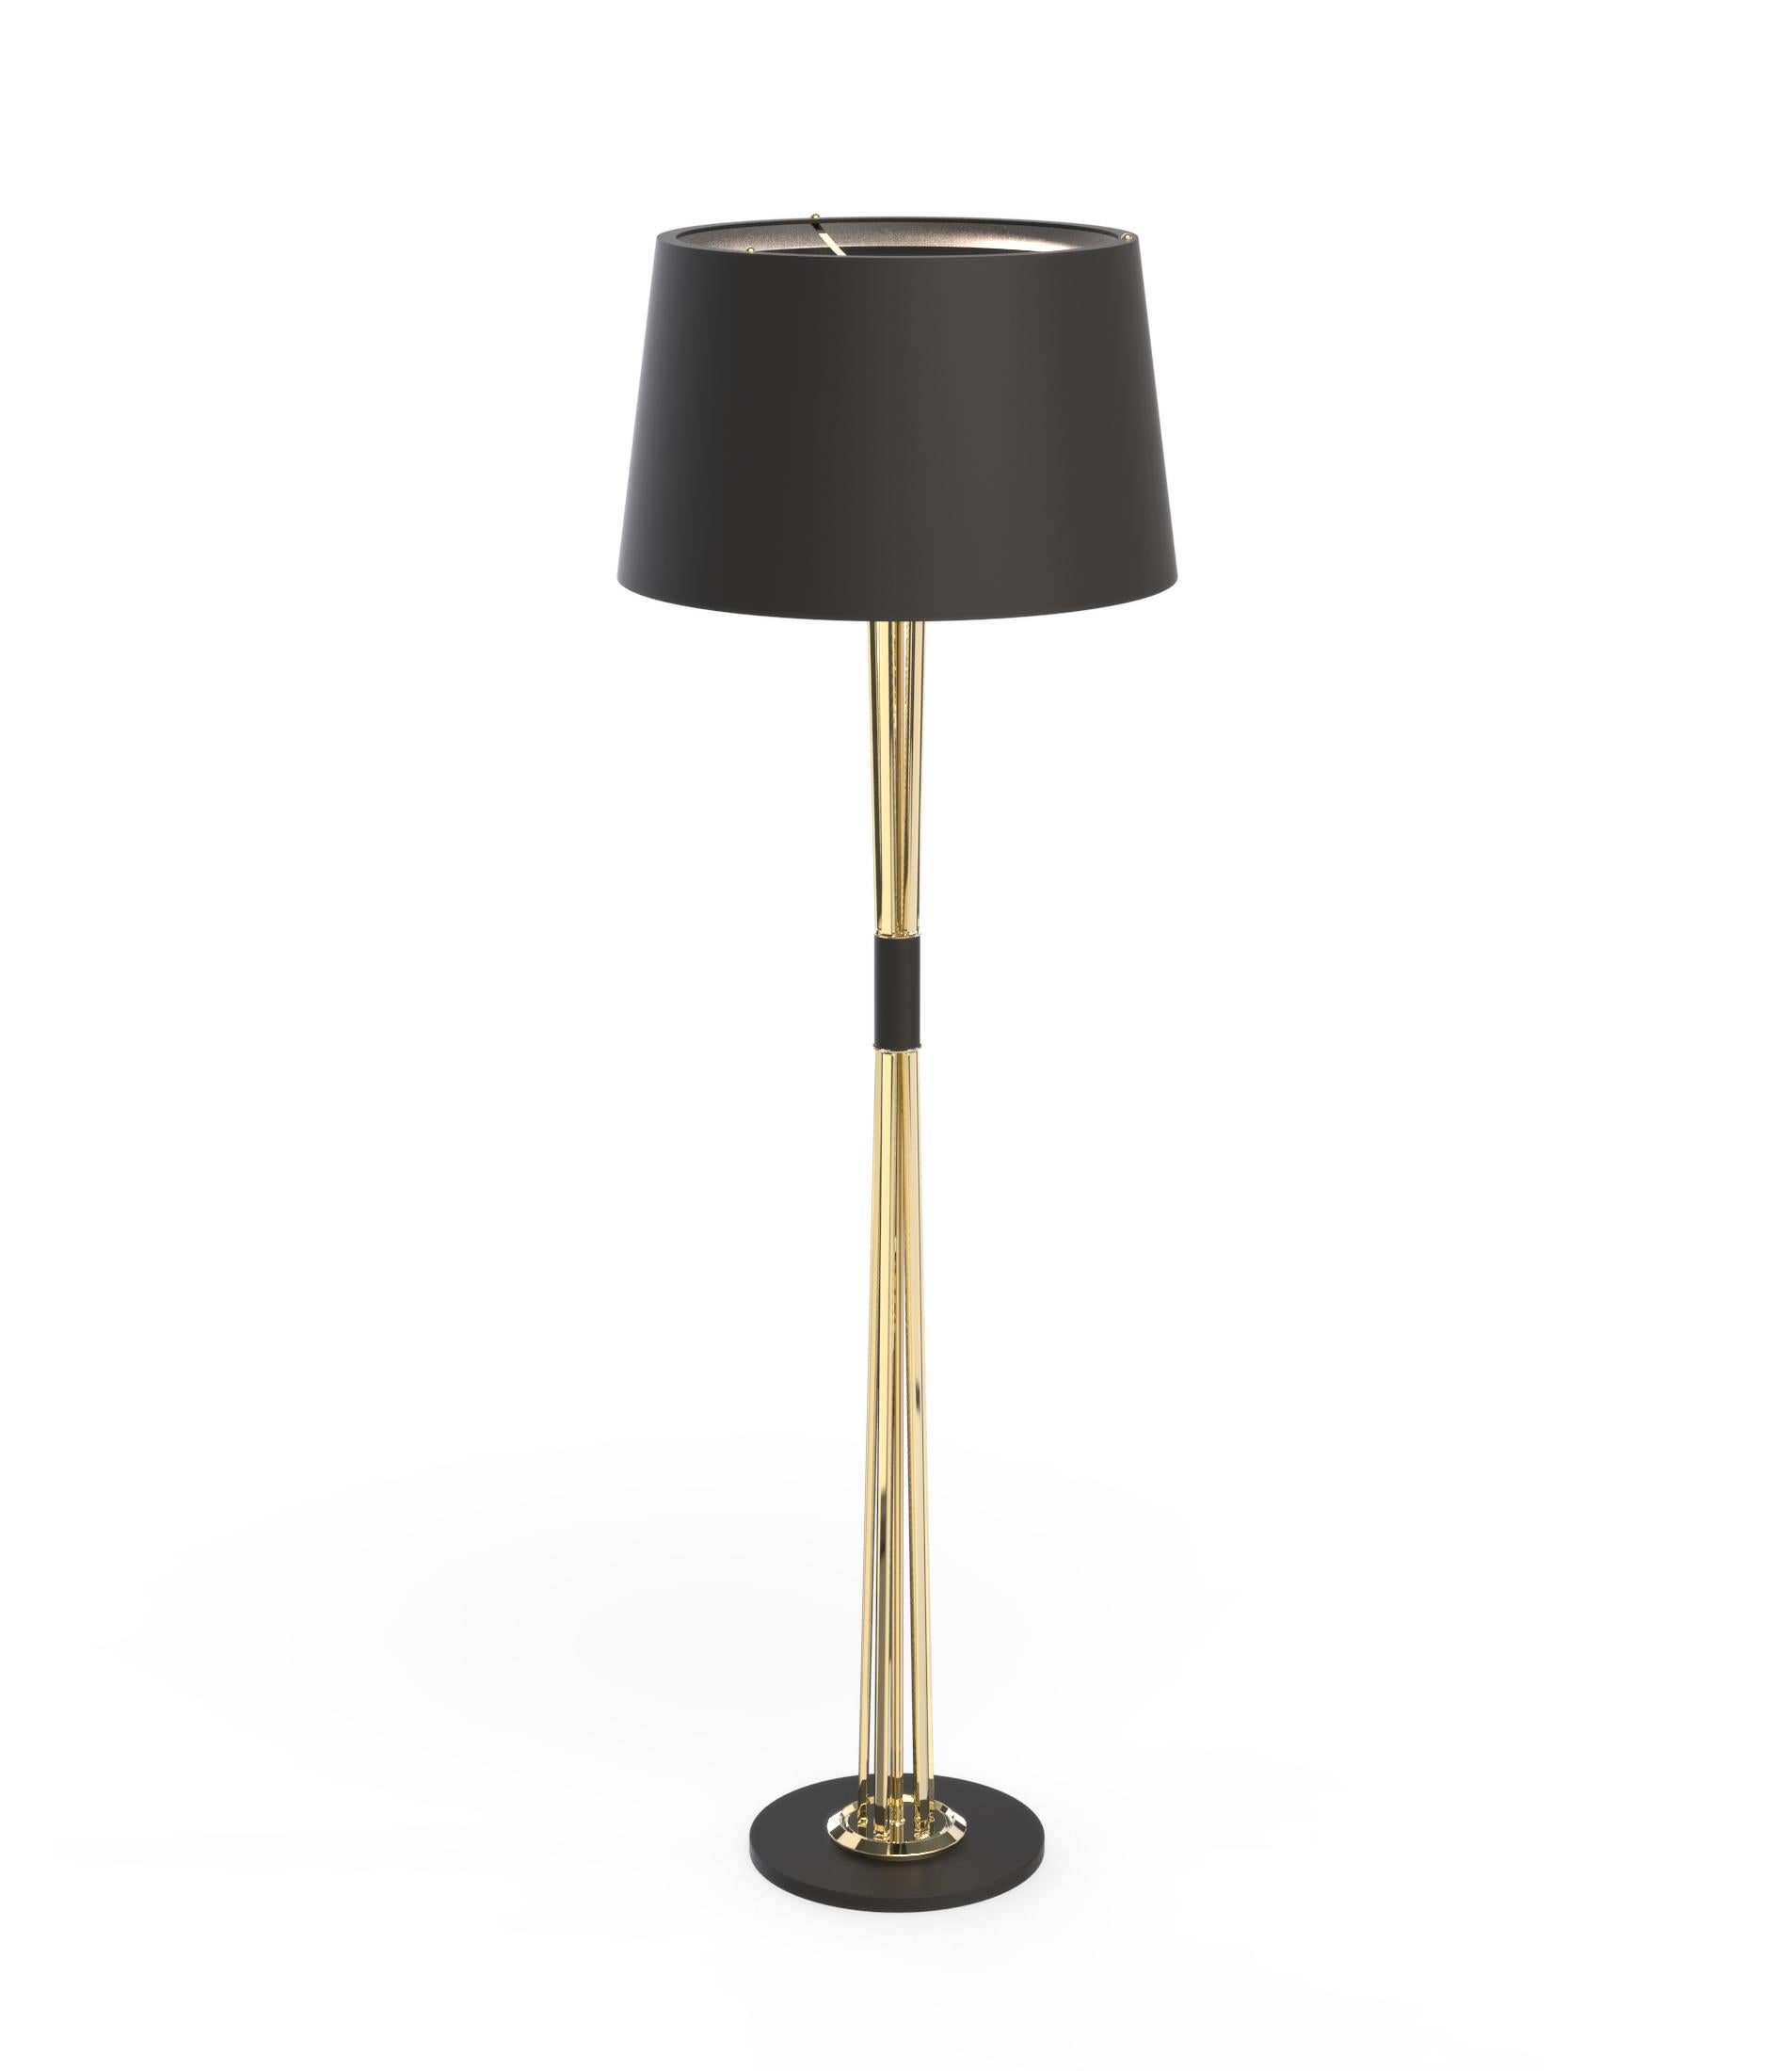 Inspired by the American jazz trumpeter, bandleader, and composer: Miles Davis, Delightfull has created a mid-century floor lamp that will bring back the sophistication and elegance of the 1950s. The black floor lamp has a vintage style that will